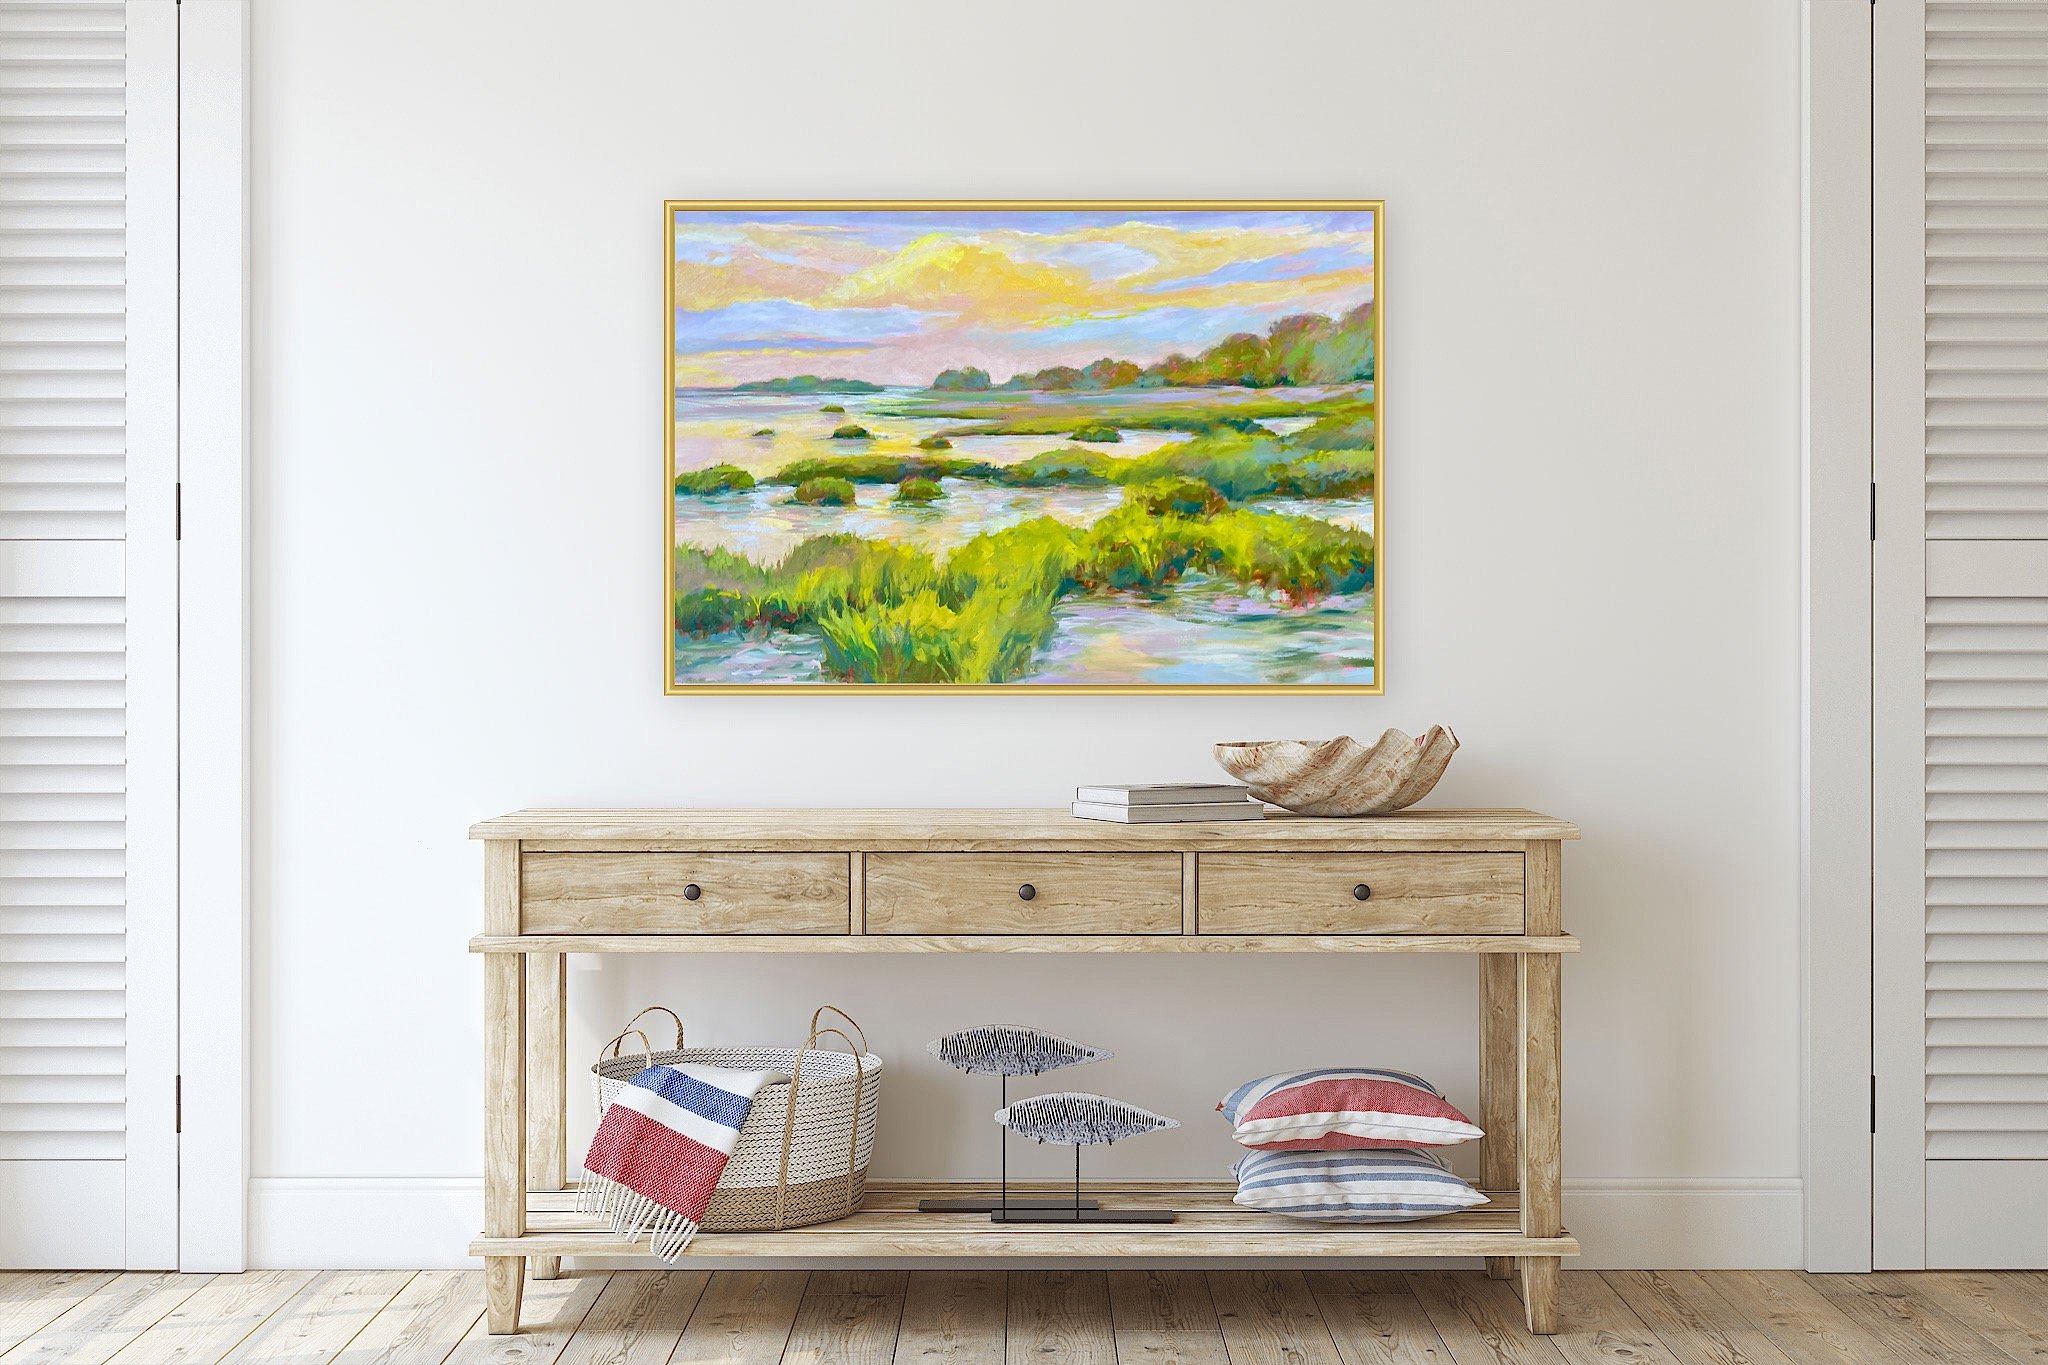 horizontal-marsh-KatiePodracky-art-colorful-nature-inspired-art-impressionistic-american-impressionist-contemporary-oil-painting-brushstrokes-colorful-nature-inspired.JPG